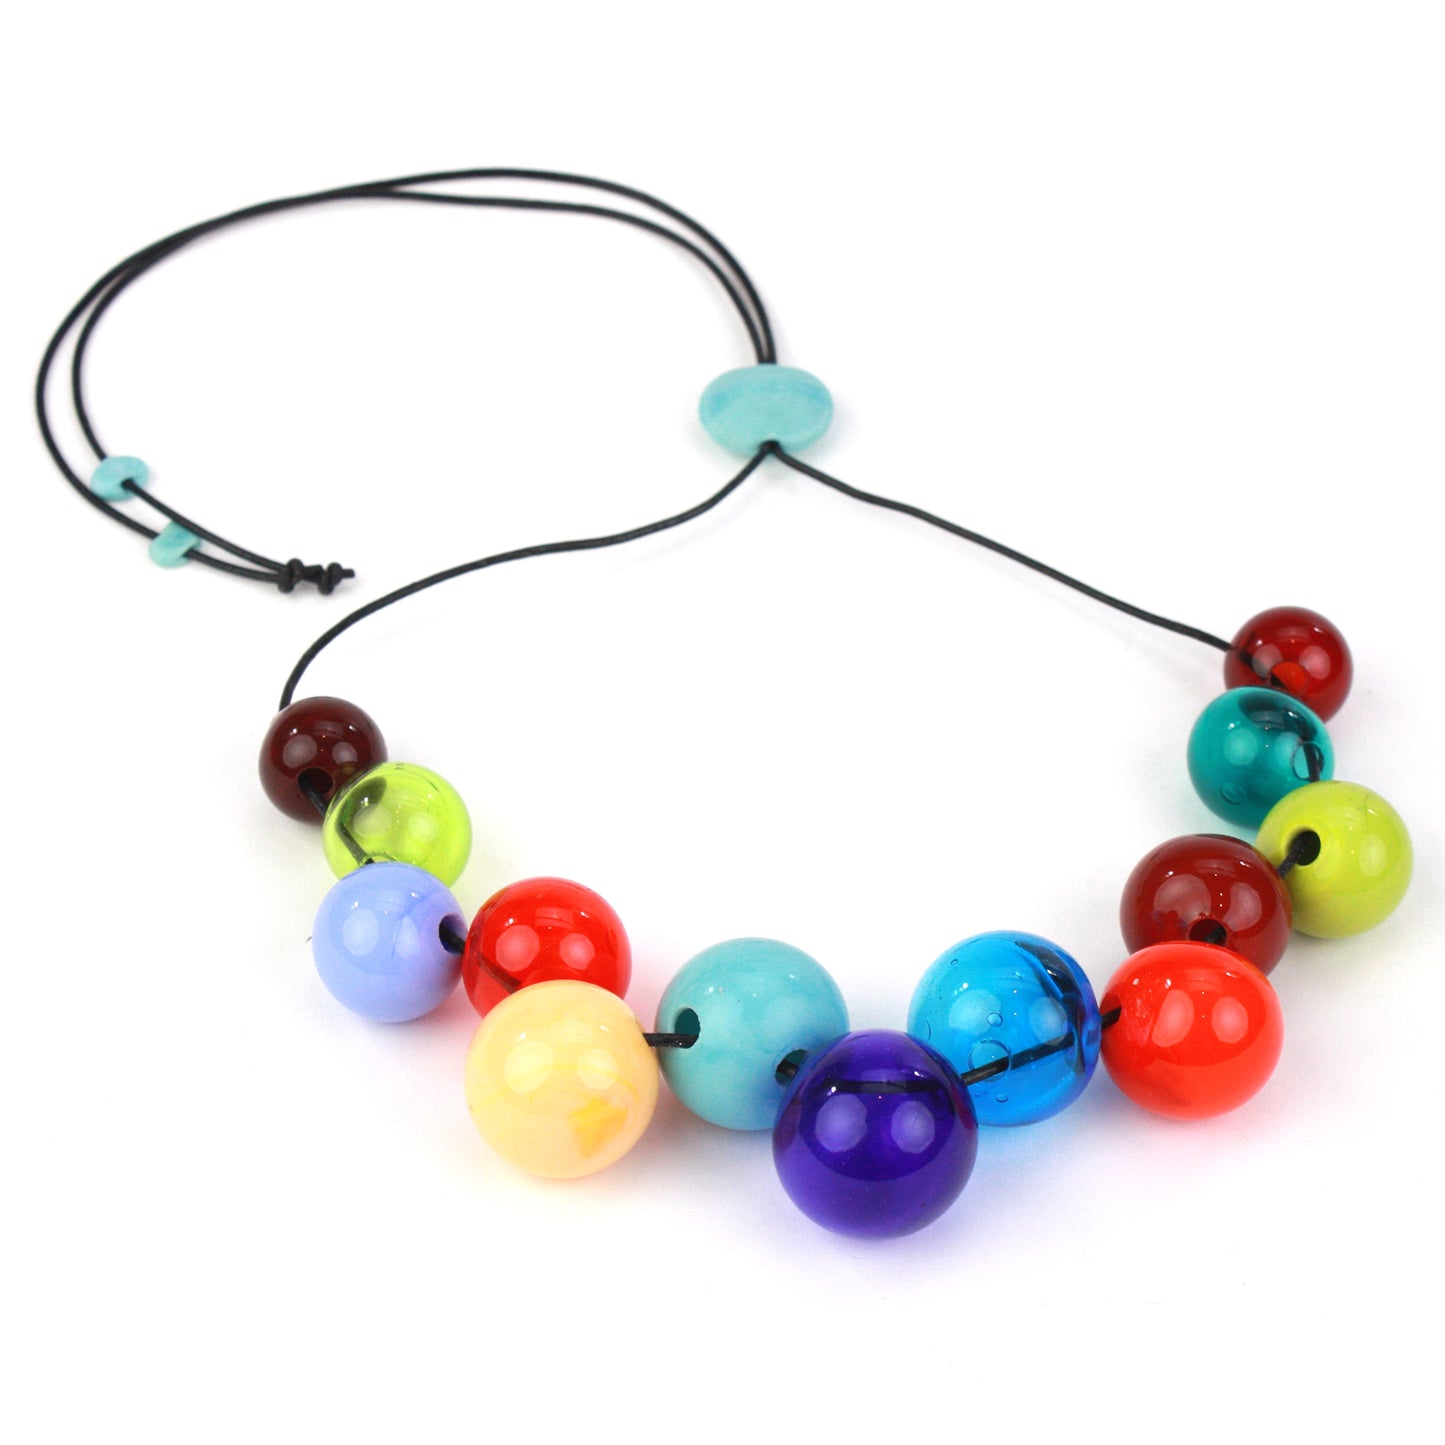 Bolla offset necklace -Multi colored